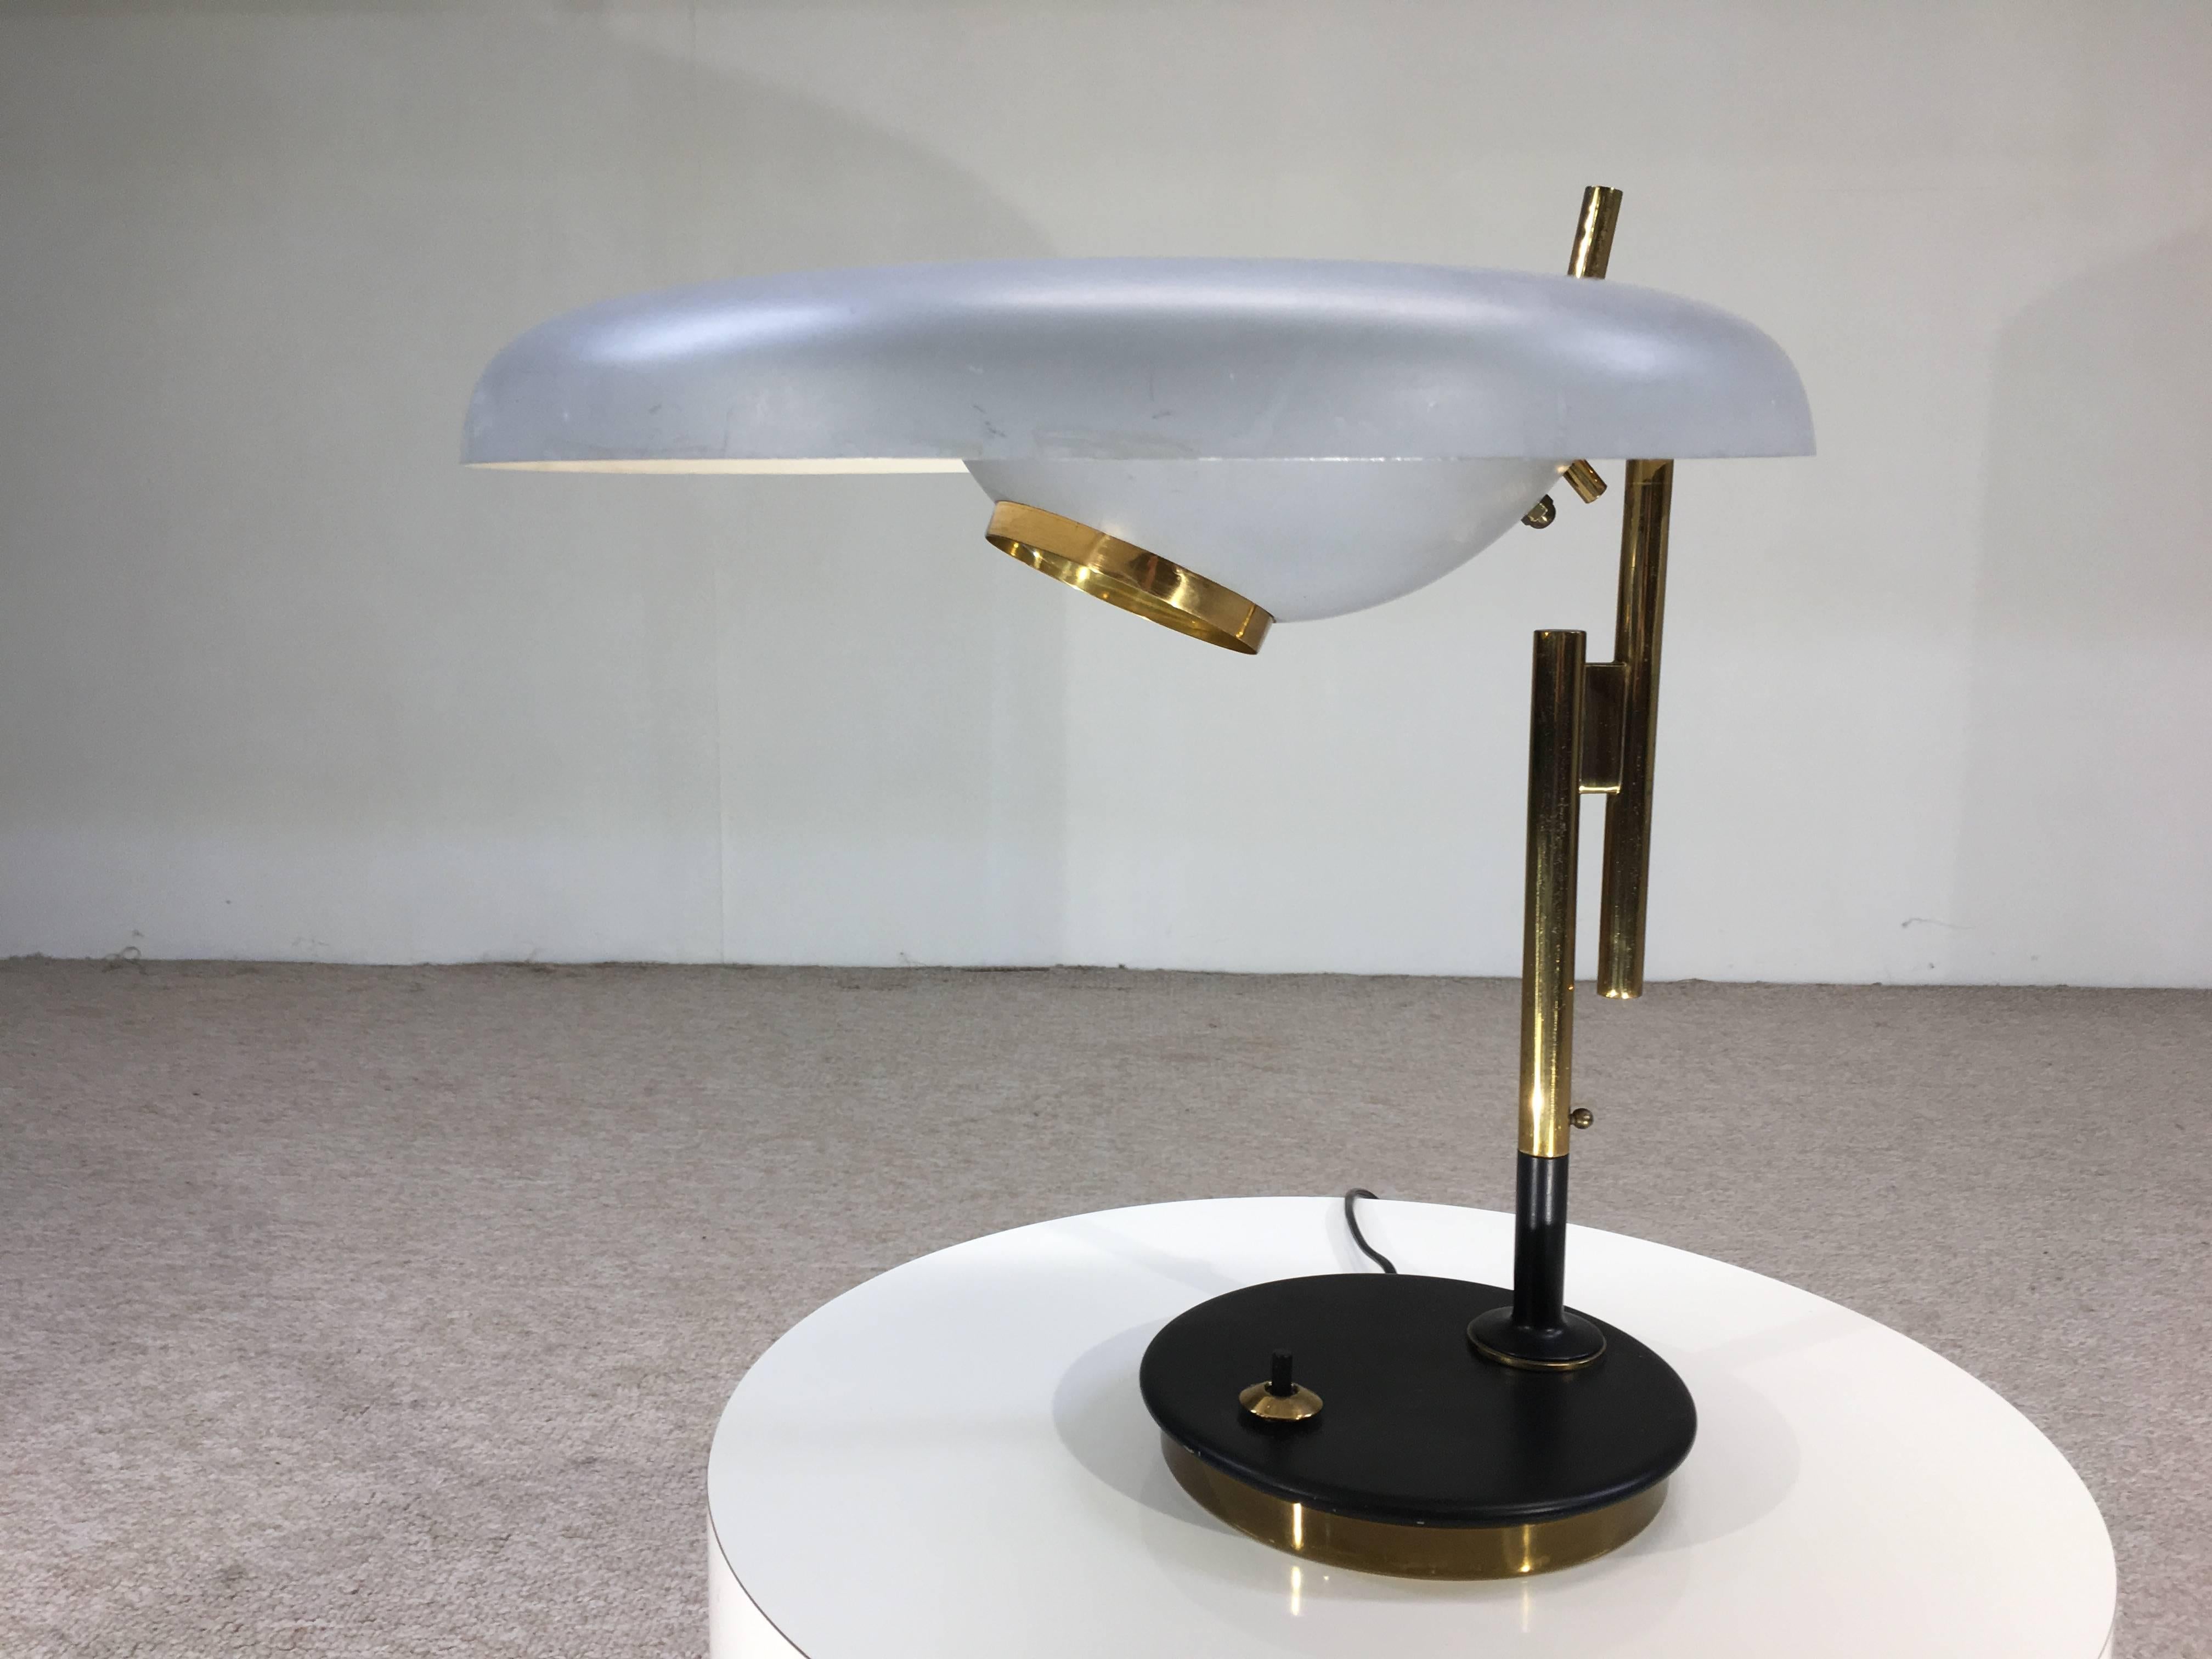 A magnificent design by one of the Italian greats. Oscar Torlasco's Magnification lamp design concentrates light with a greater focus on the work area. It is also completely adjustable being able to rotate completely around to light a room. 
